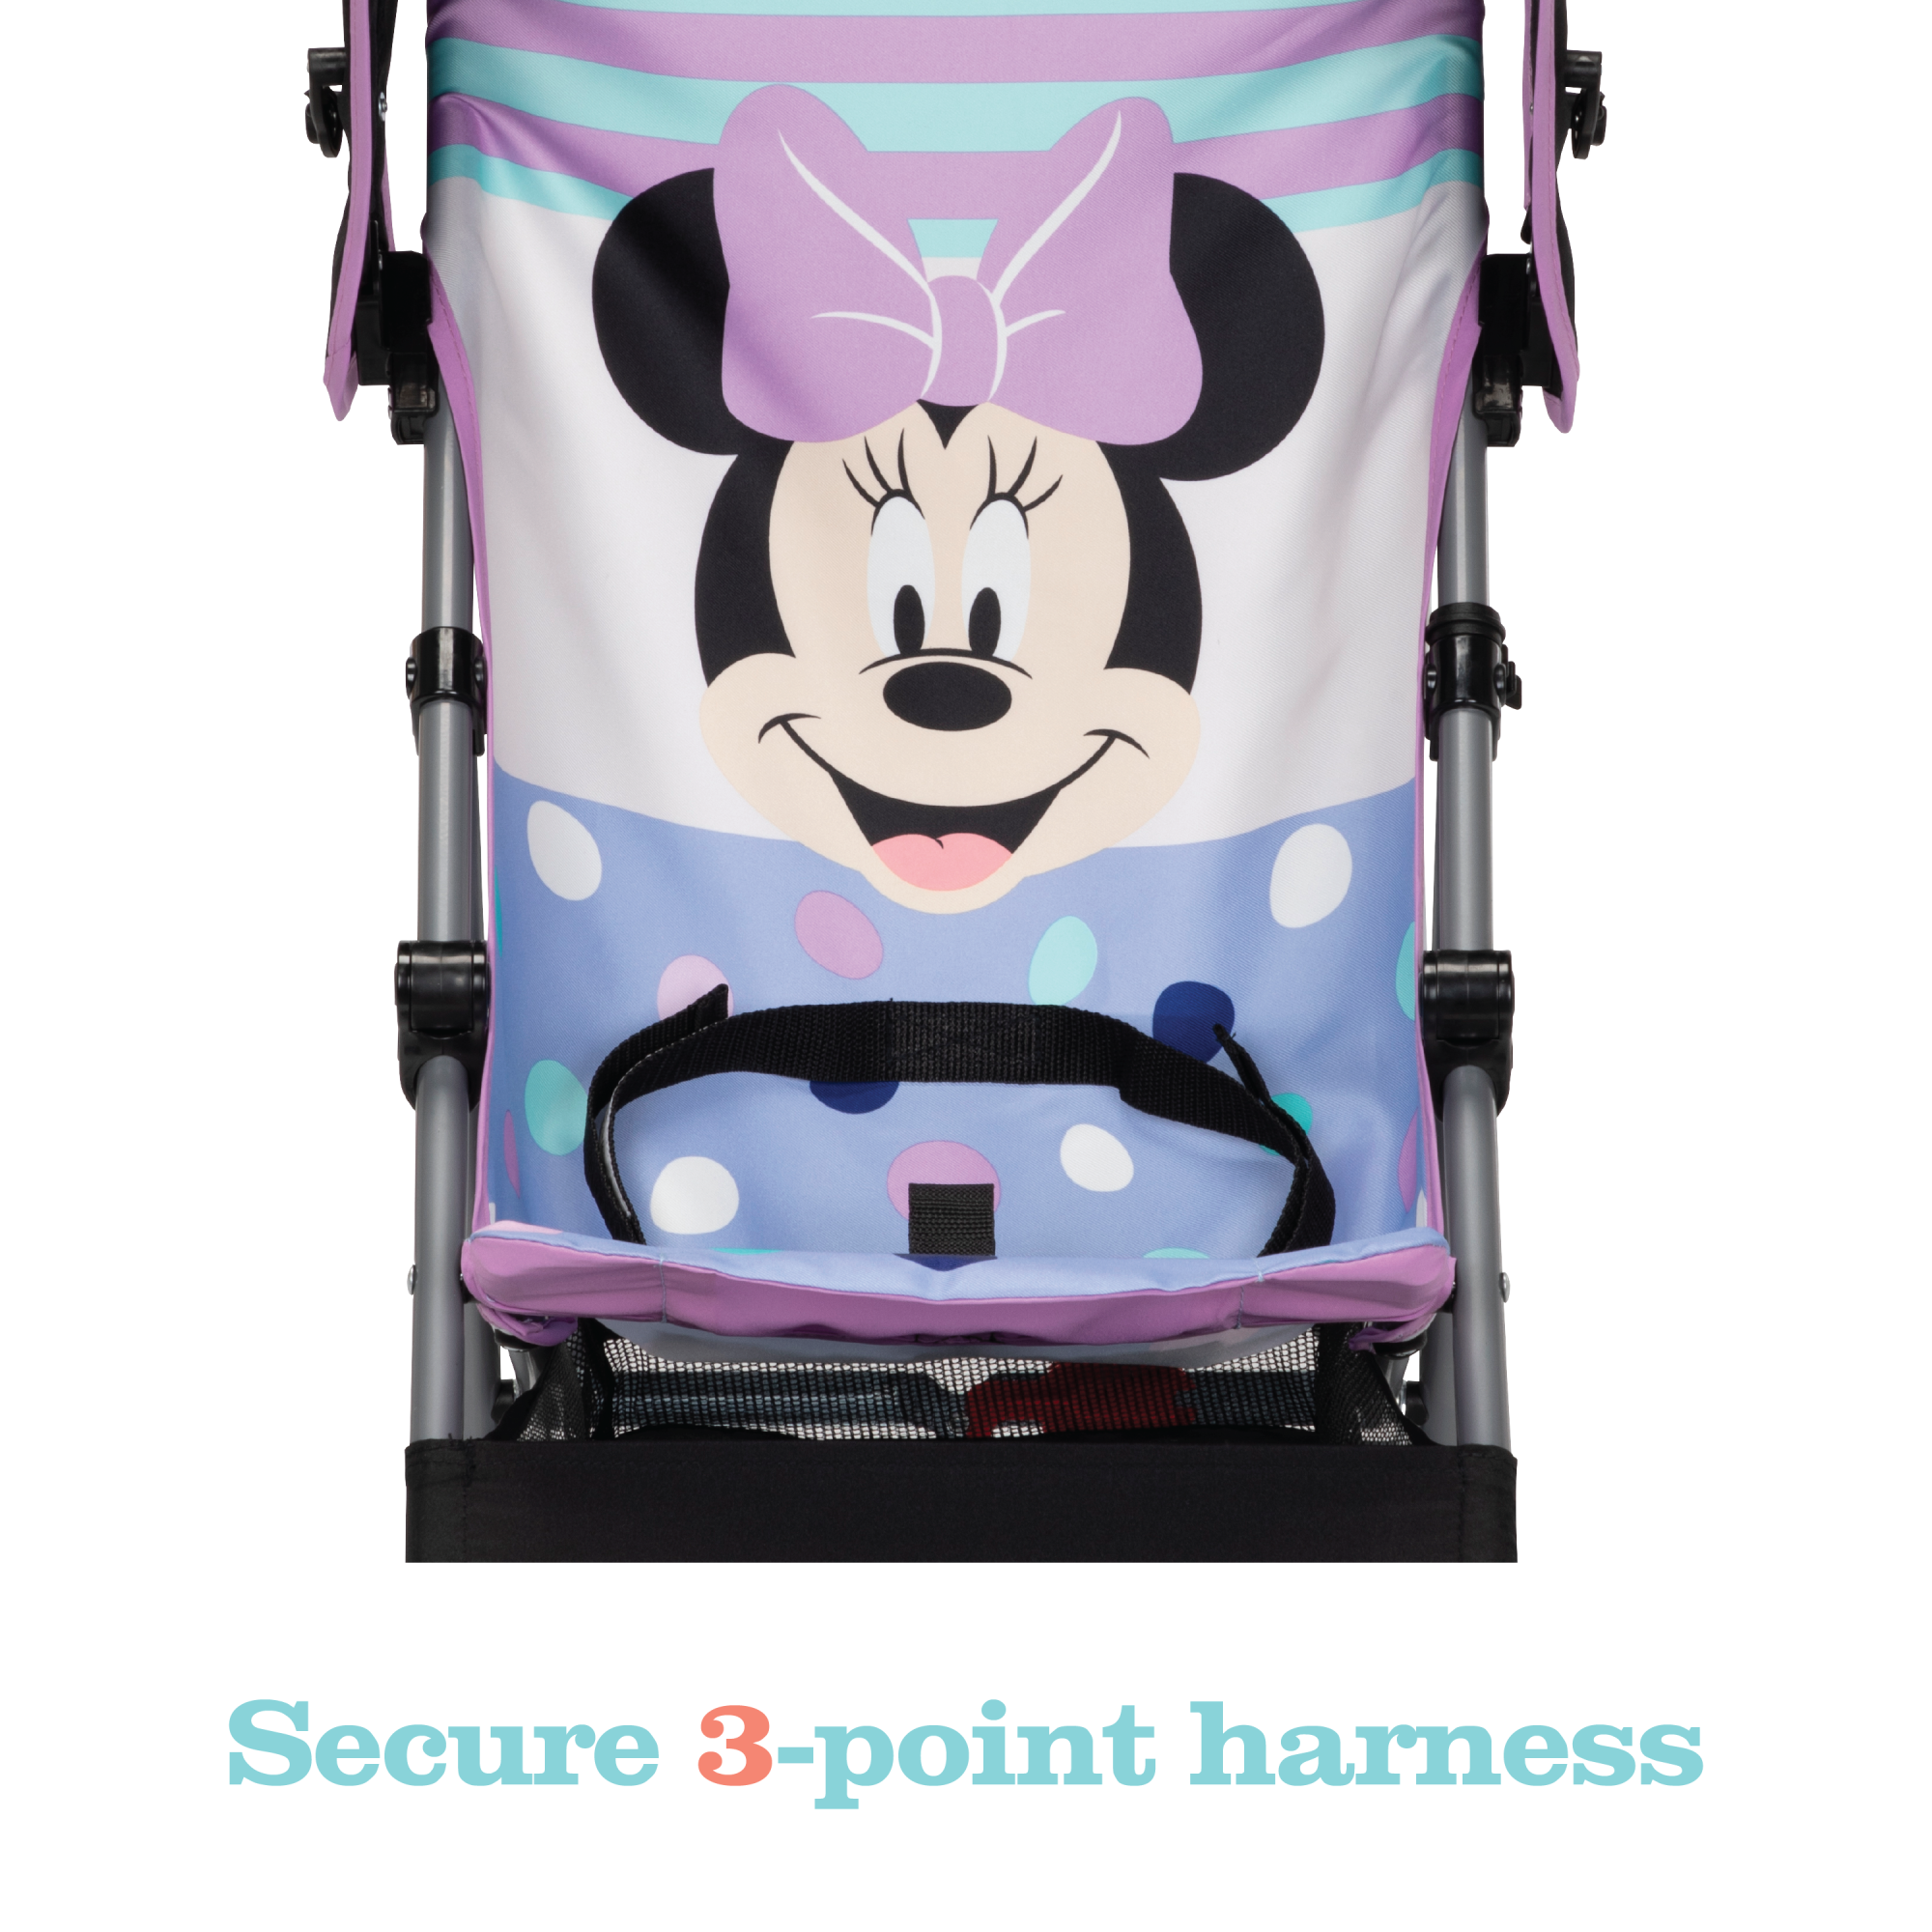 Disney Baby Character Umbrella Stroller - secure 3-point harness